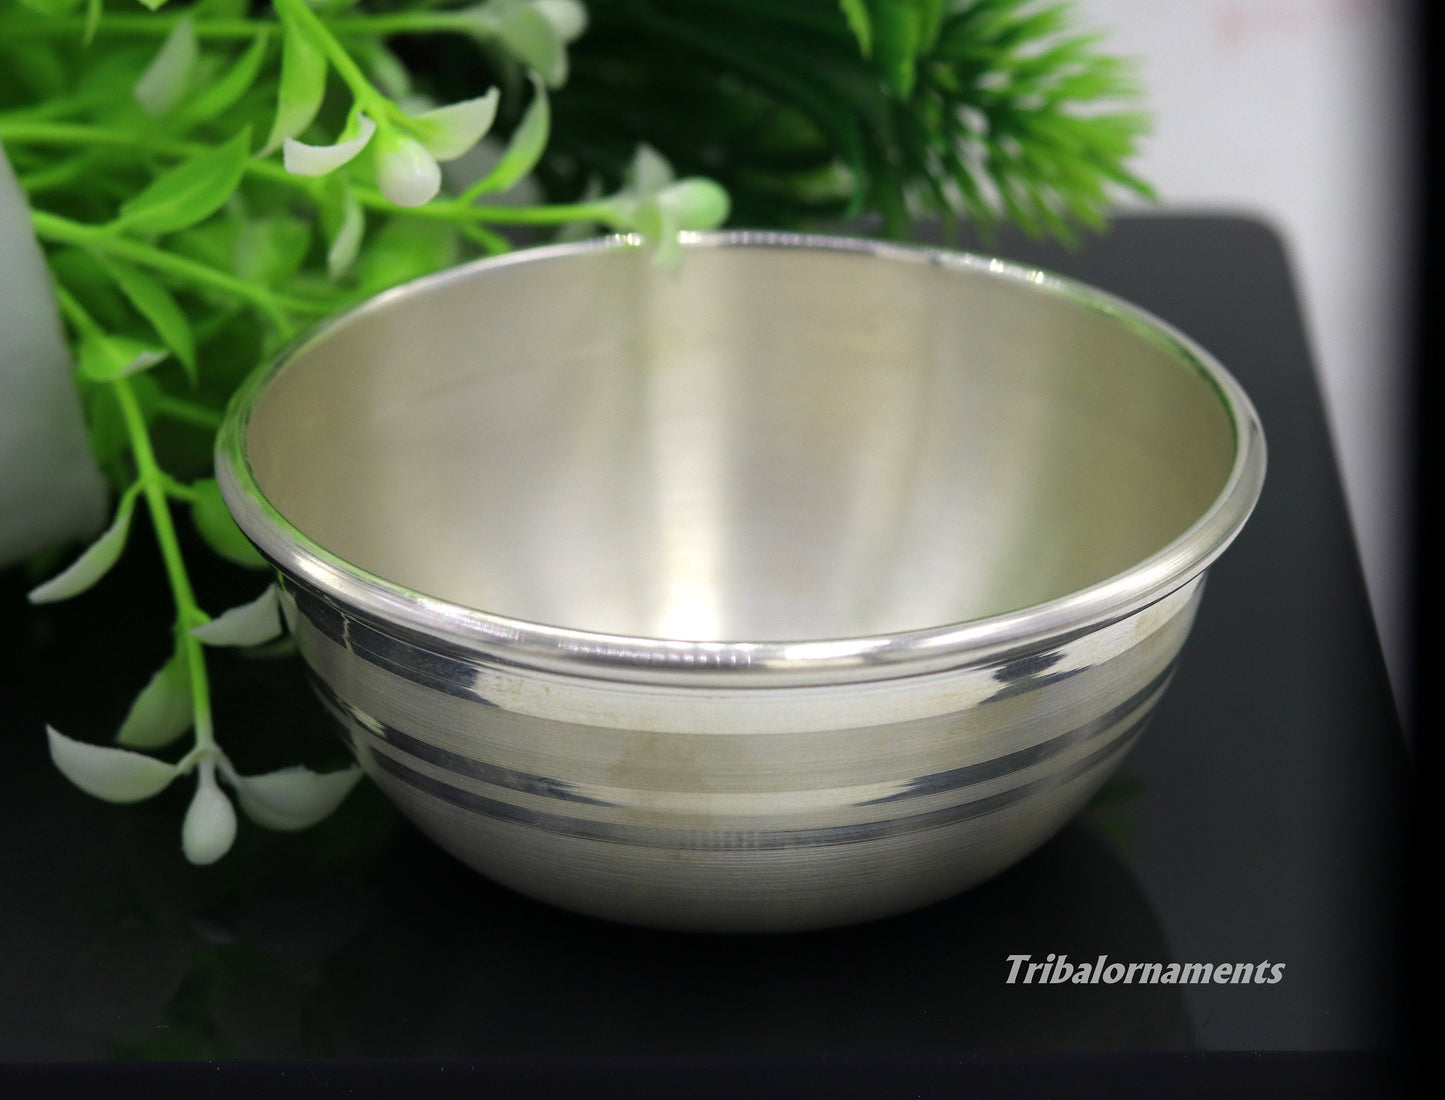 999 pure sterling silver handmade silver bowl and spoon set, silver has antibacterial properties, keep stay healthy, silver vessels sv21 - TRIBAL ORNAMENTS